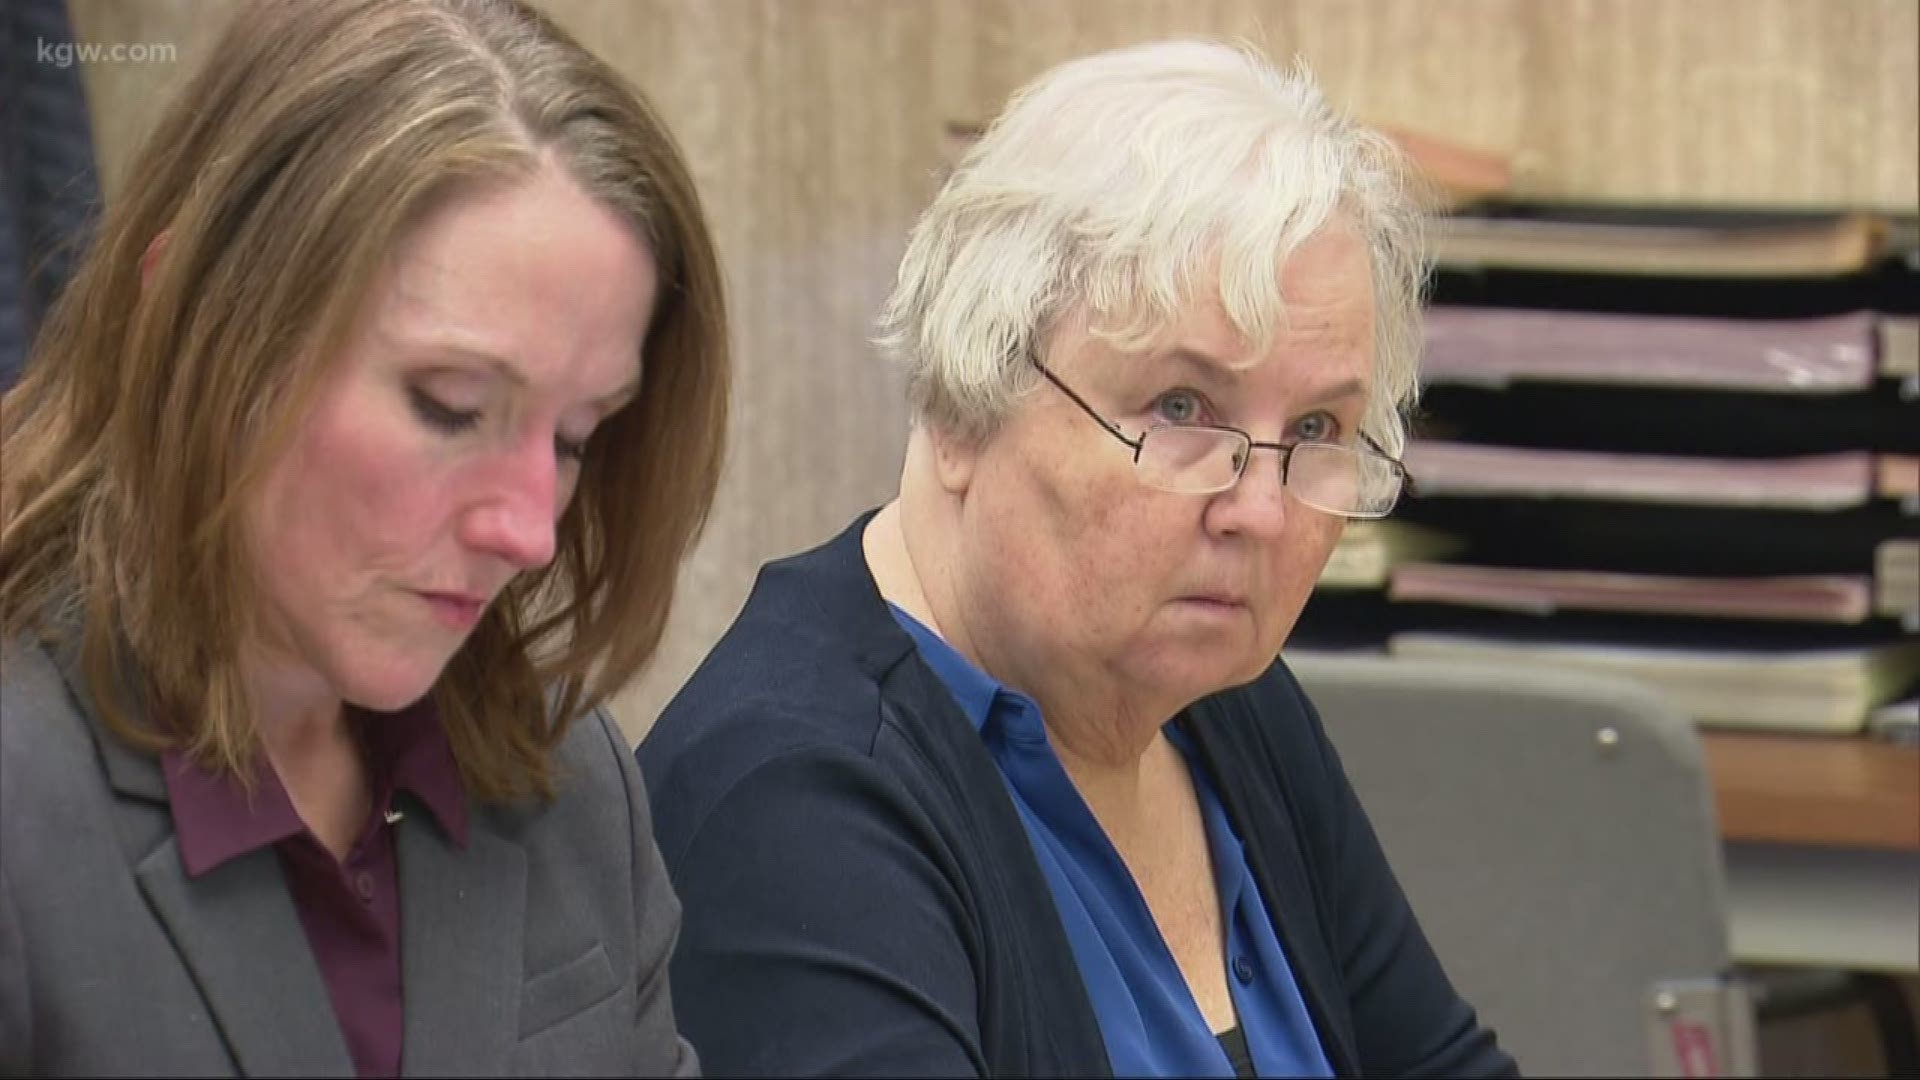 The Multnomah County District Attorney's Office said Nancy Brophy may be committing crimes while in jail. The accusation came during a hearing over whether Brophy's jail visitors log should be made public.